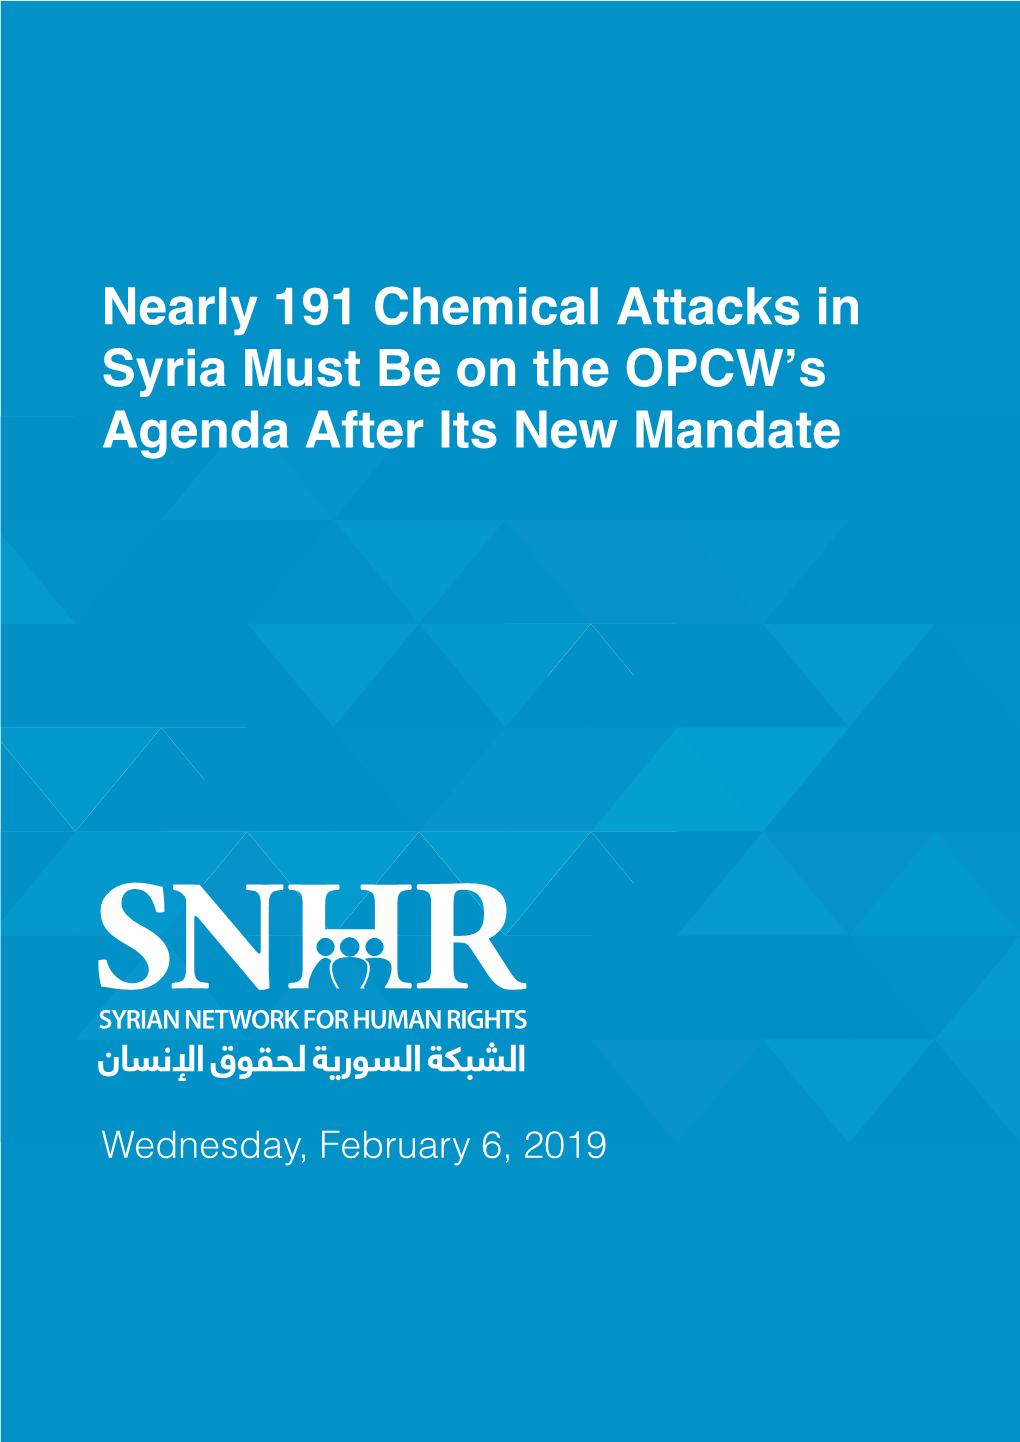 Nearly 191 Chemical Attacks in Syria Must Be on the OPCW's Agenda